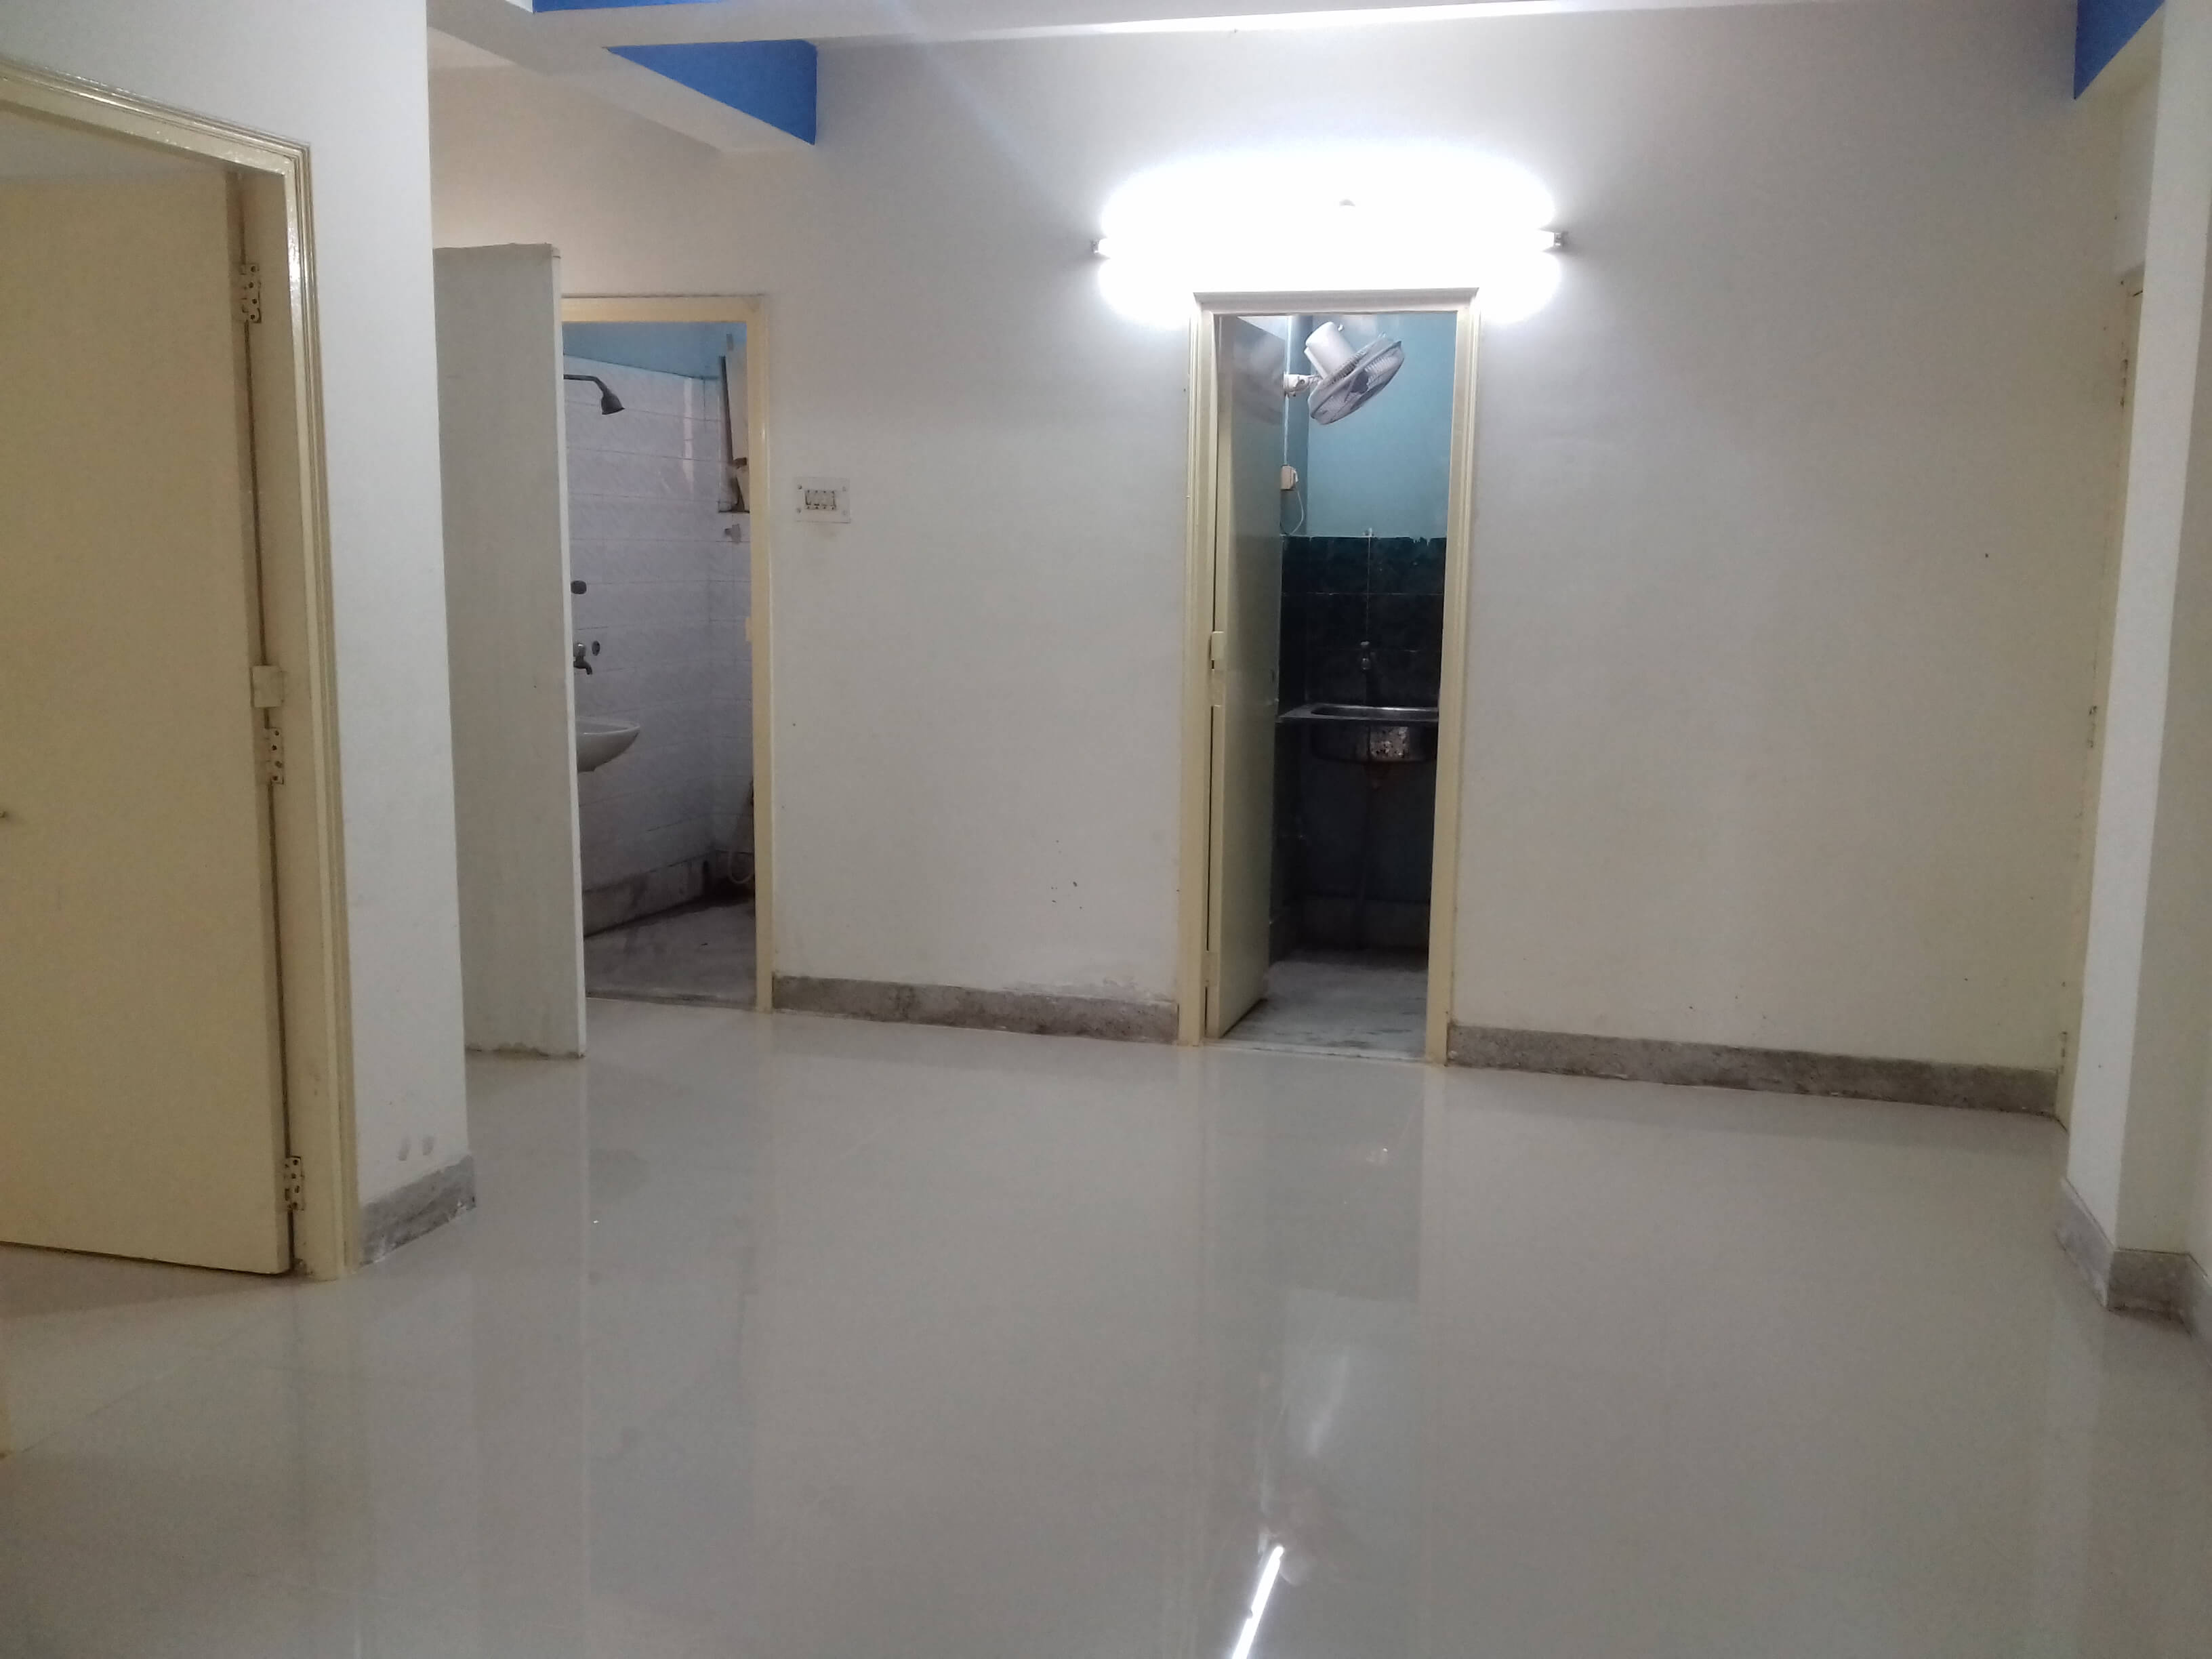 Office For Rent in Hiland Park,Kolkata (Id:10402)